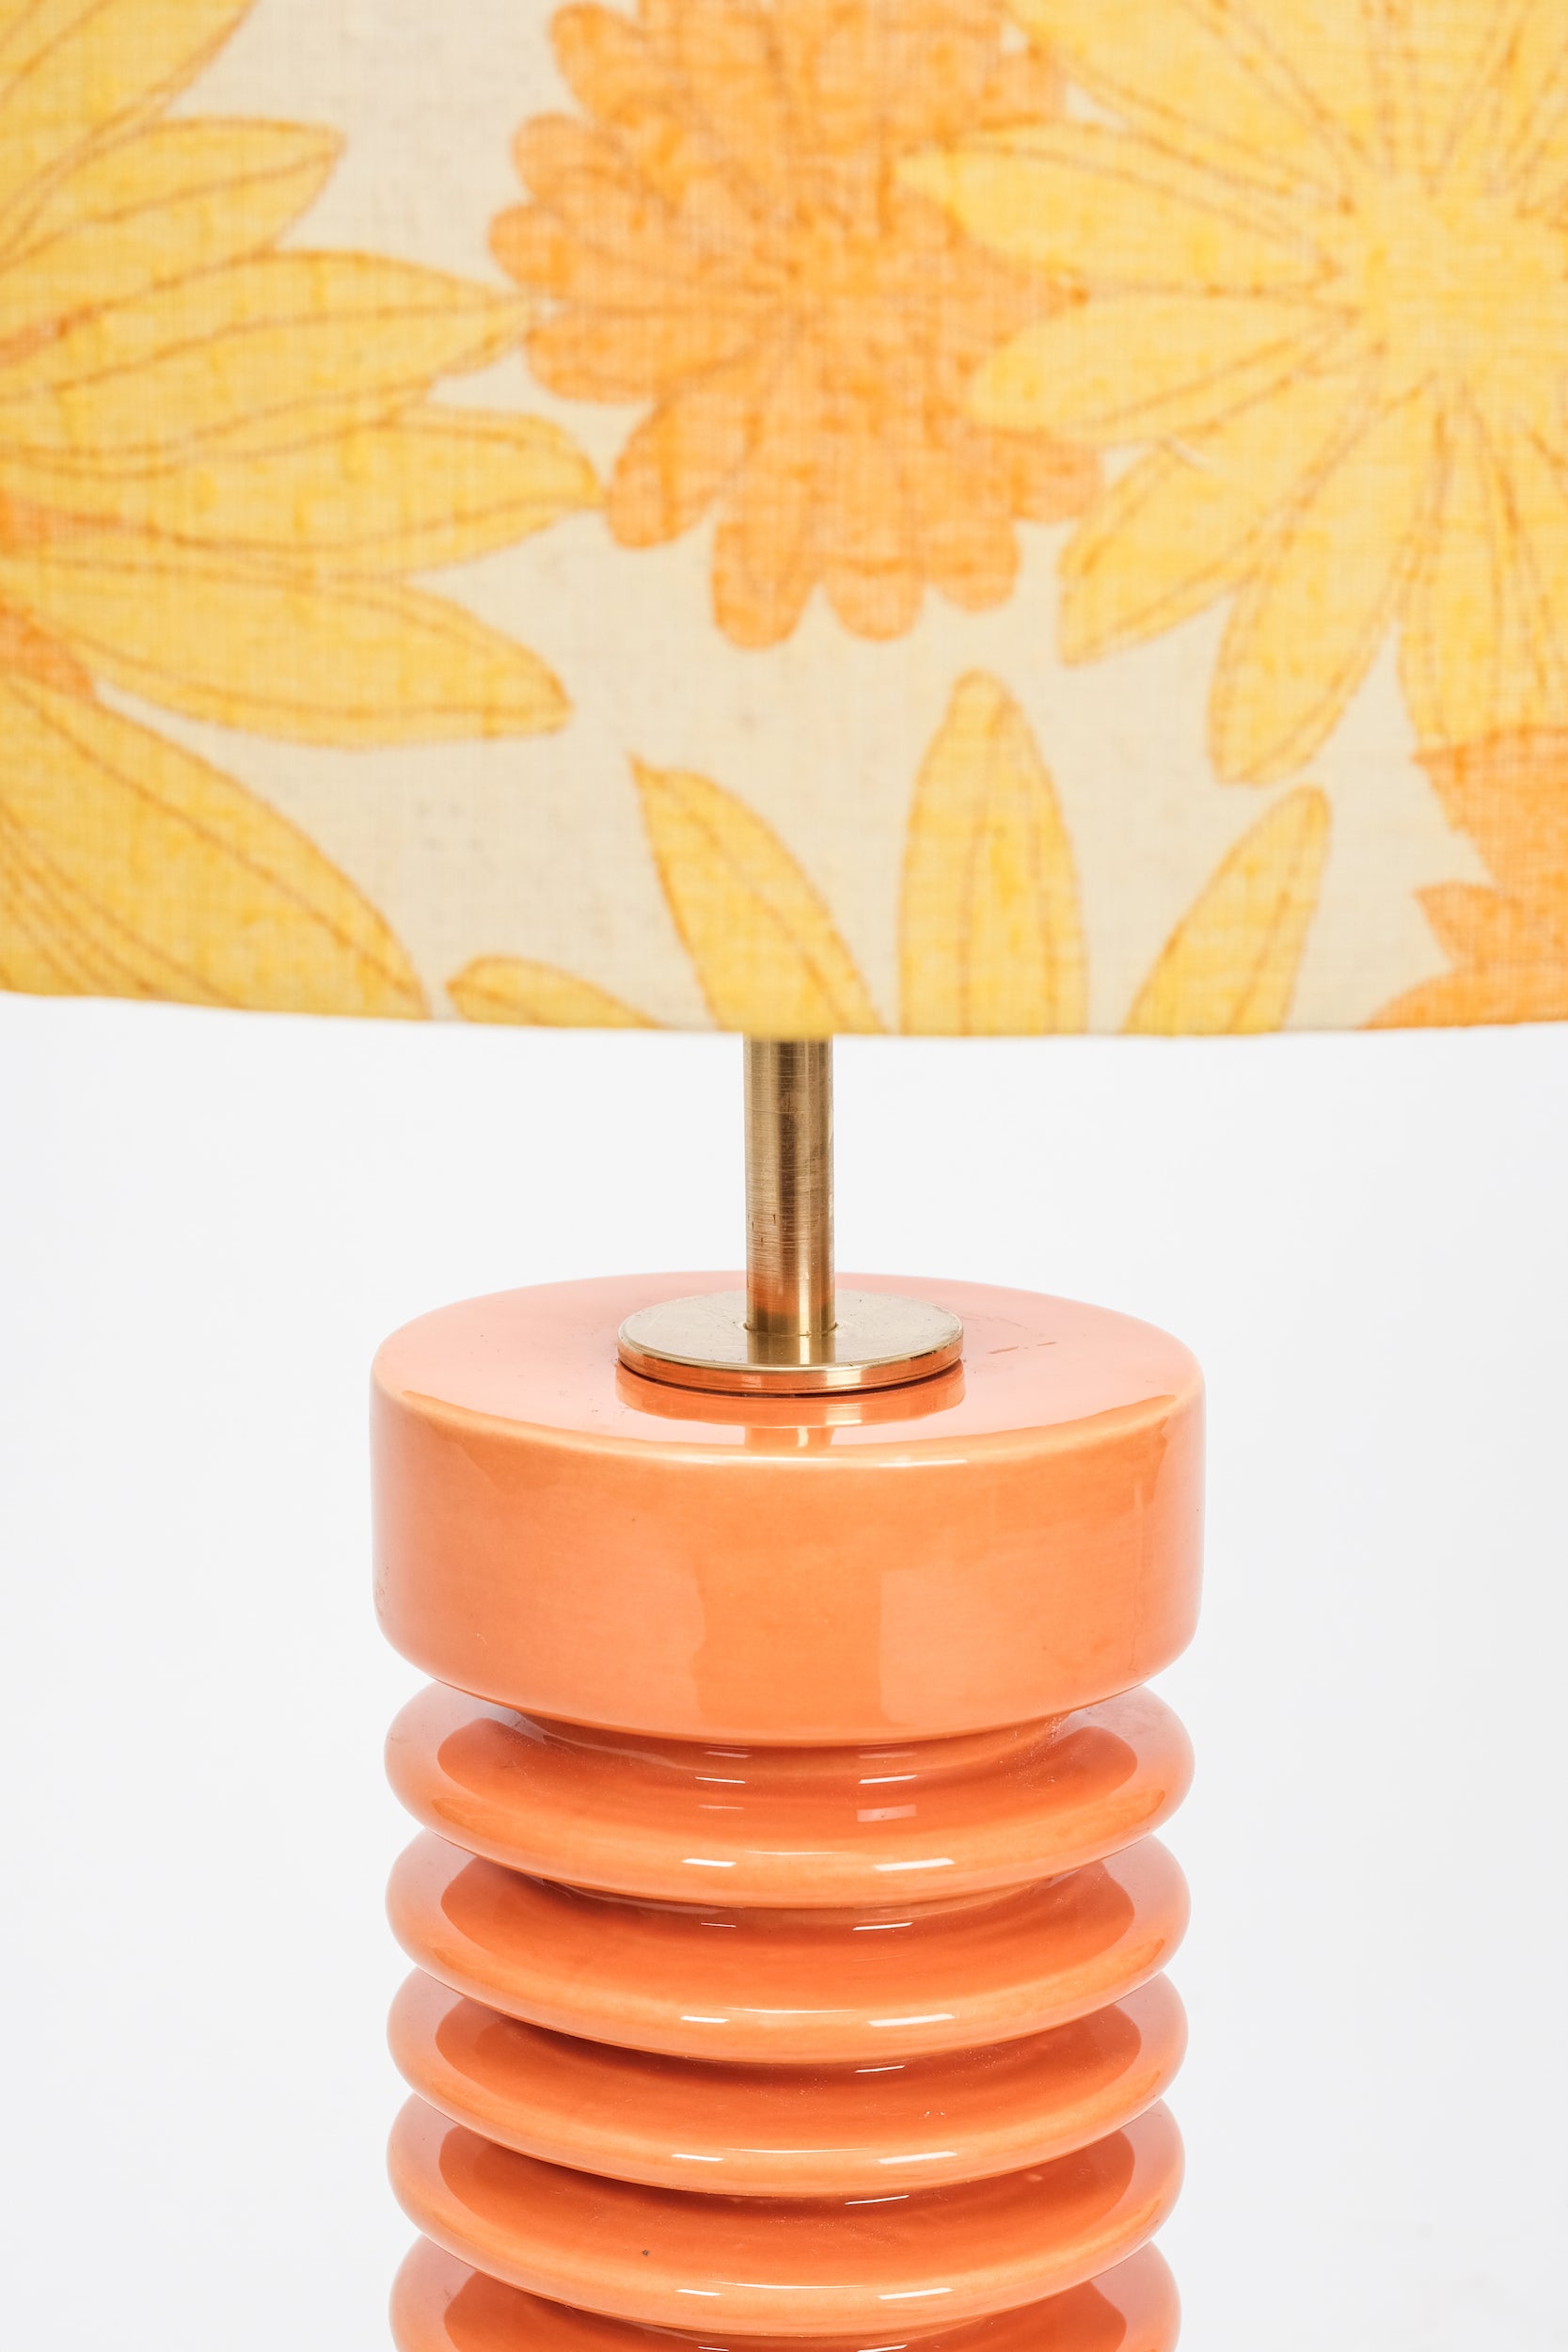  French Ceramic Table Lamp with Flower Shade, 70s